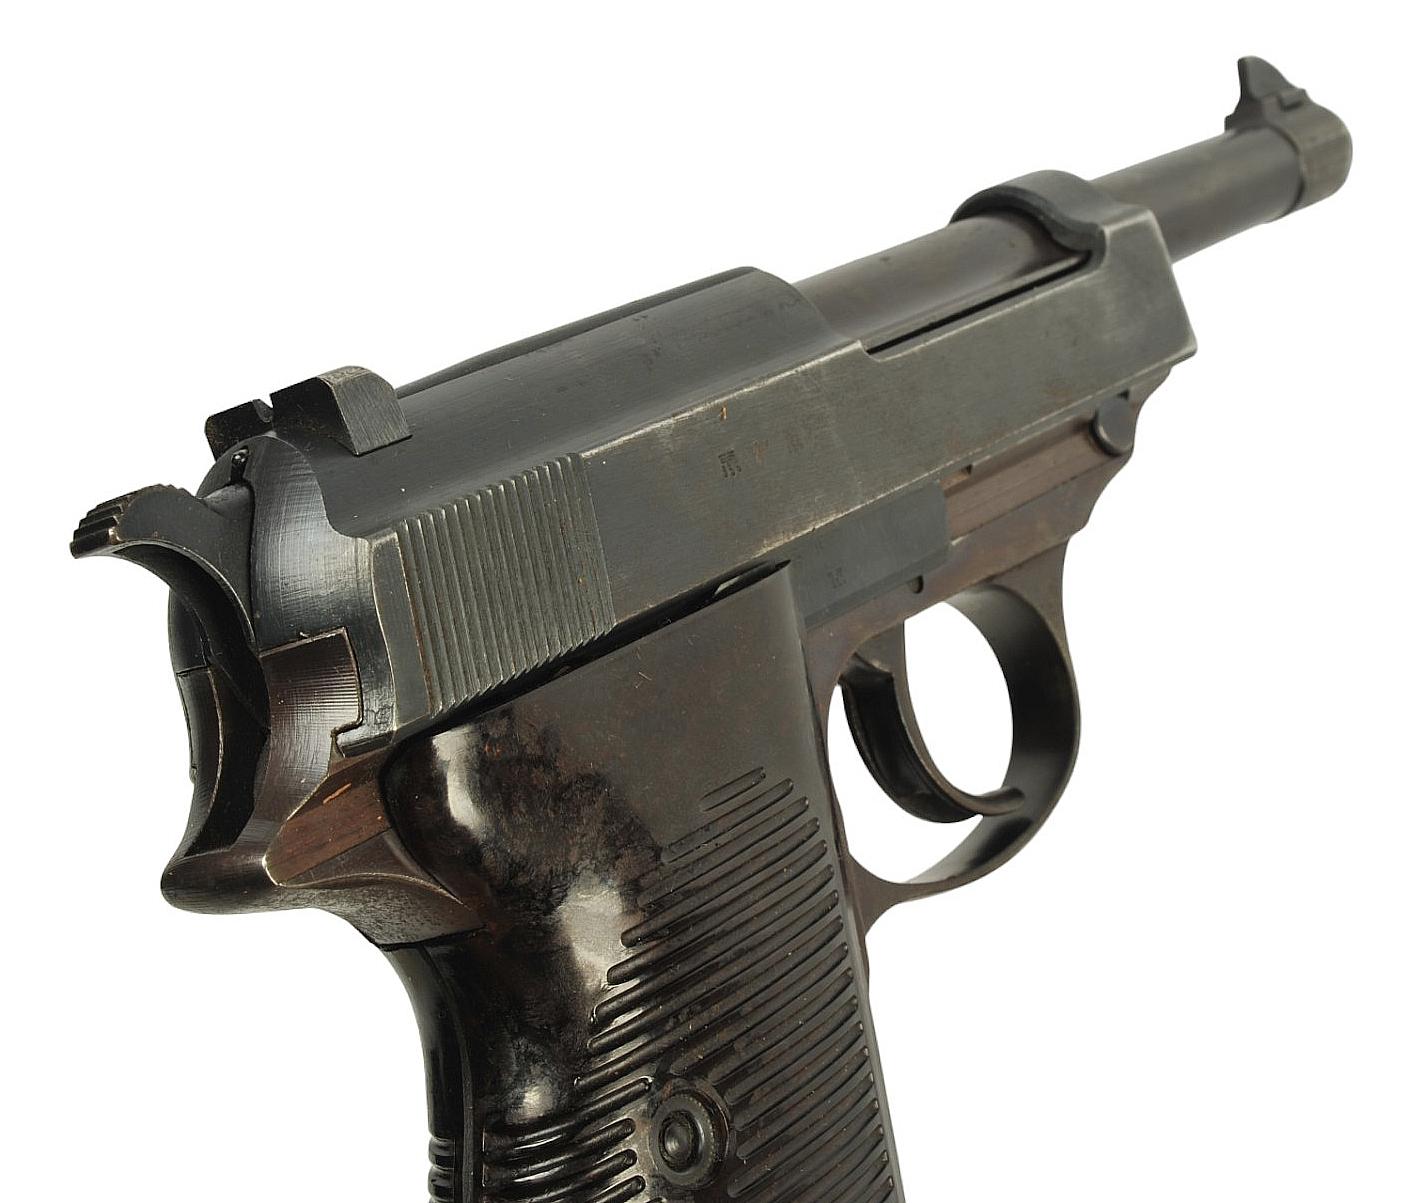 German AC41 Code Walther P38 9MM Semi-auto Pistol & Capture Papers FFL Required 162i (J1E1)